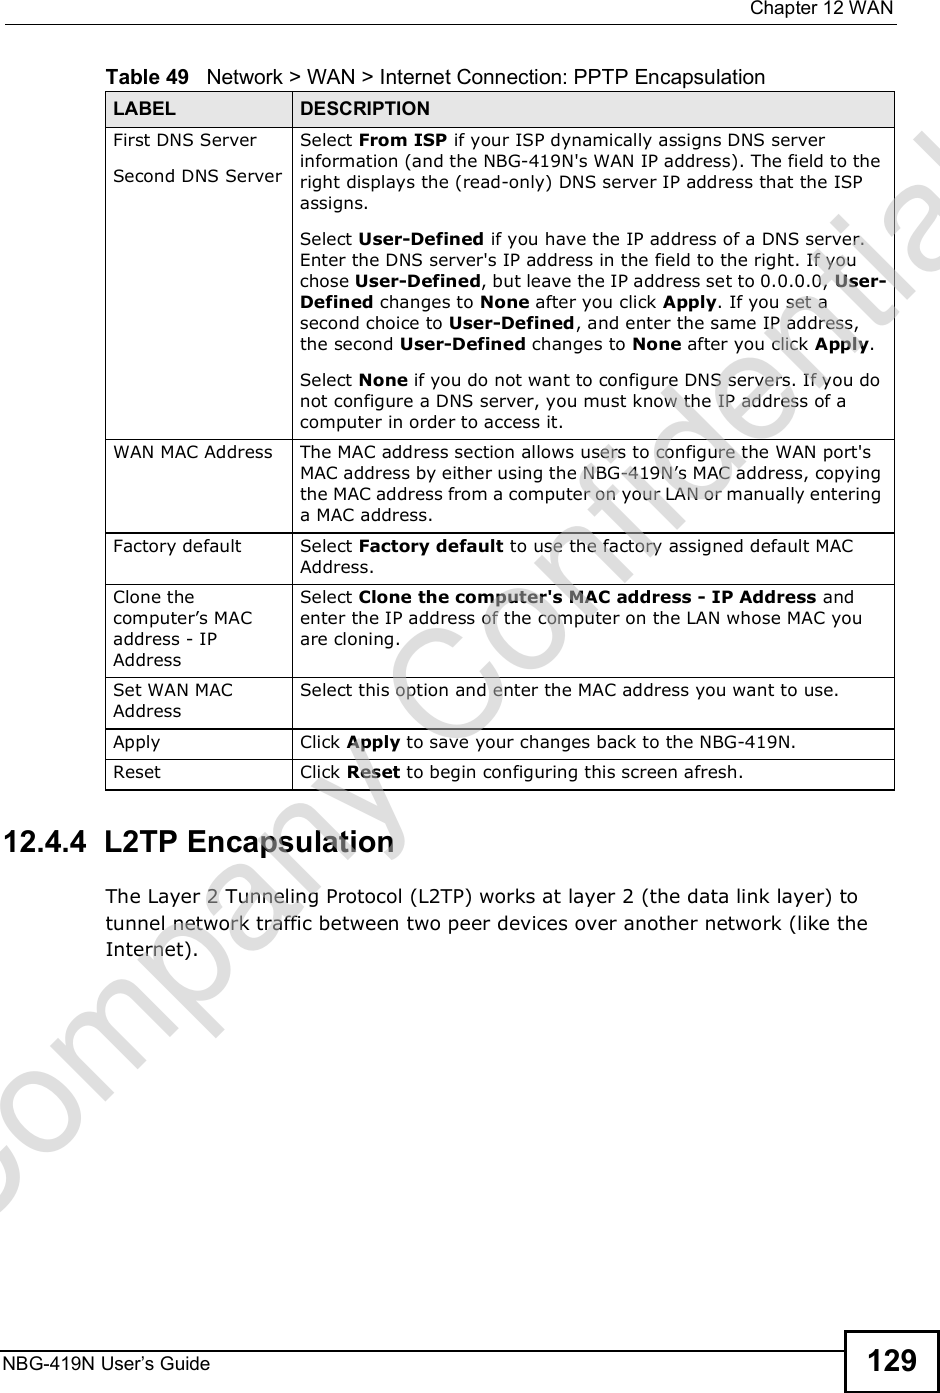  Chapter 12WANNBG-419N User s Guide 12912.4.4  L2TP EncapsulationThe Layer 2 Tunneling Protocol (L2TP) works at layer 2 (the data link layer) to tunnel network traffic between two peer devices over another network (like the Internet).First DNS ServerSecond DNS ServerSelect From ISP if your ISP dynamically assigns DNS server information (and the NBG-419N&apos;s WAN IP address). The field to the right displays the (read-only) DNS server IP address that the ISP assigns. Select User-Defined if you have the IP address of a DNS server. Enter the DNS server&apos;s IP address in the field to the right. If you chose User-Defined, but leave the IP address set to 0.0.0.0, User-Defined changes to None after you click Apply. If you set a second choice to User-Defined, and enter the same IP address, the second User-Defined changes to None after you click Apply. Select None if you do not want to configure DNS servers. If you do not configure a DNS server, you must know the IP address of a computer in order to access it.WAN MAC Address The MAC address section allows users to configure the WAN port&apos;s MAC address by either using the NBG-419N!s MAC address, copying the MAC address from a computer on your LAN or manually entering a MAC address. Factory default Select Factory default to use the factory assigned default MAC Address.Clone the computer!s MAC address - IP AddressSelect Clone the computer&apos;s MAC address - IP Address and enter the IP address of the computer on the LAN whose MAC you are cloning.Set WAN MAC AddressSelect this option and enter the MAC address you want to use.Apply Click Apply to save your changes back to the NBG-419N.Reset Click Reset to begin configuring this screen afresh.Table 49   Network &gt; WAN &gt; Internet Connection: PPTP EncapsulationLABEL DESCRIPTIONCompany Confidential